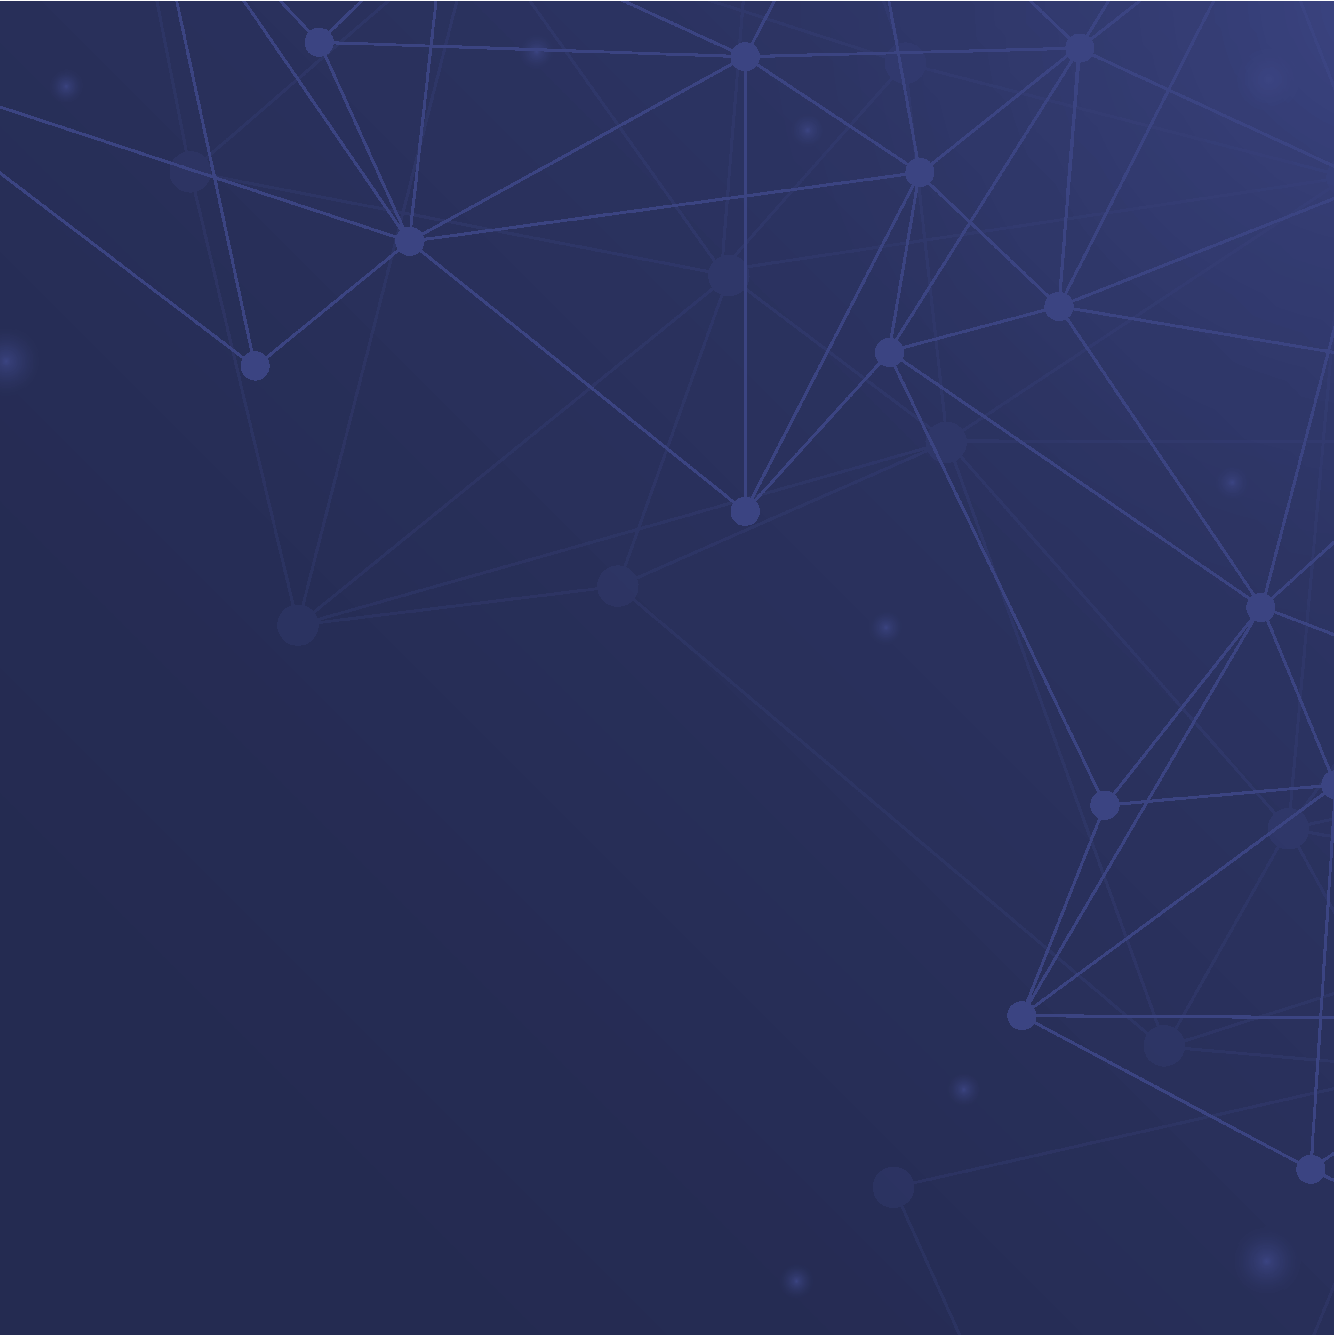 Dark blue colored, abstract technology design with vector connection lines